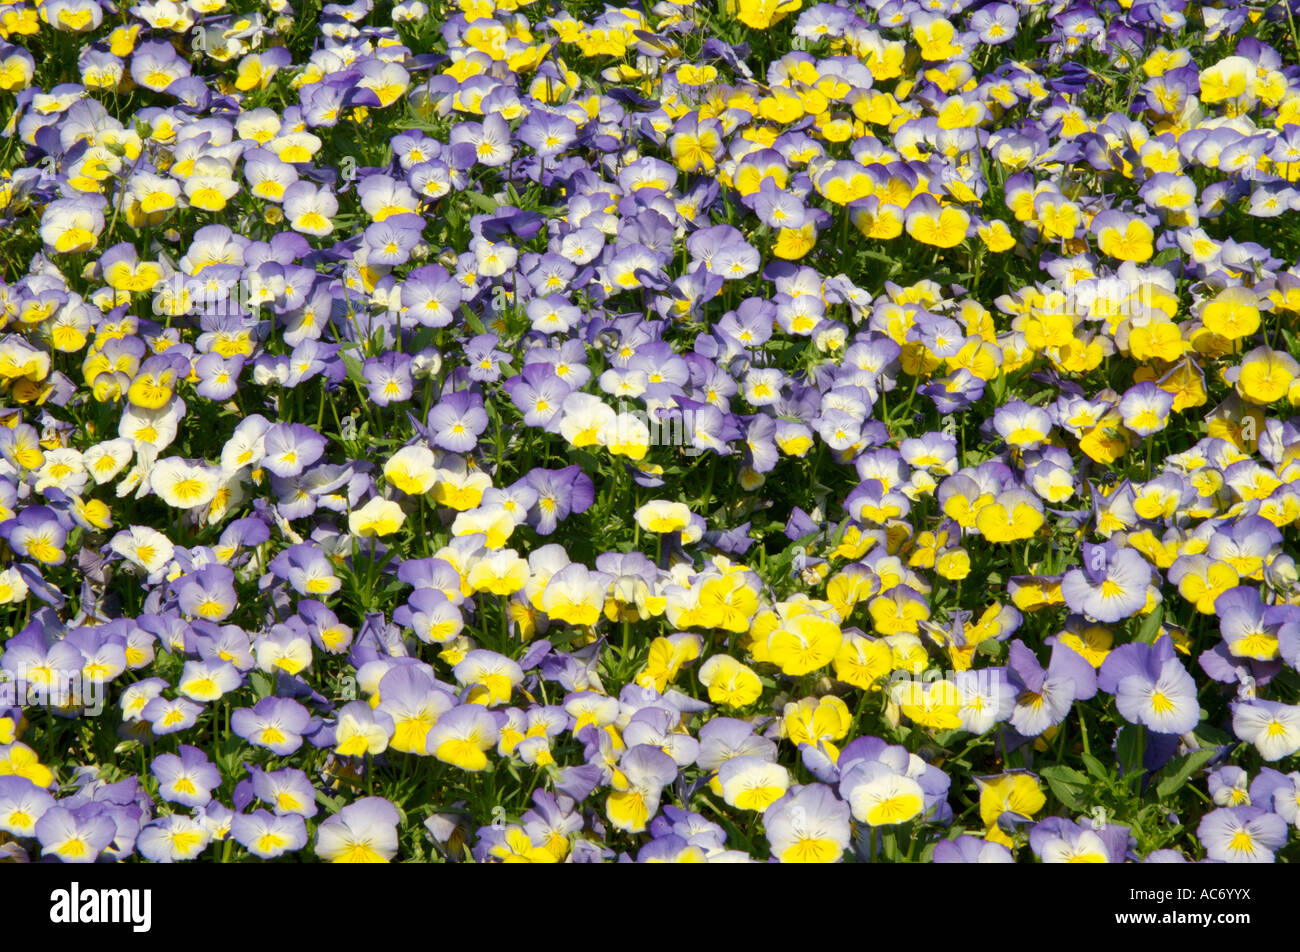 carpet of purple and yellow pansy flowers Stock Photo